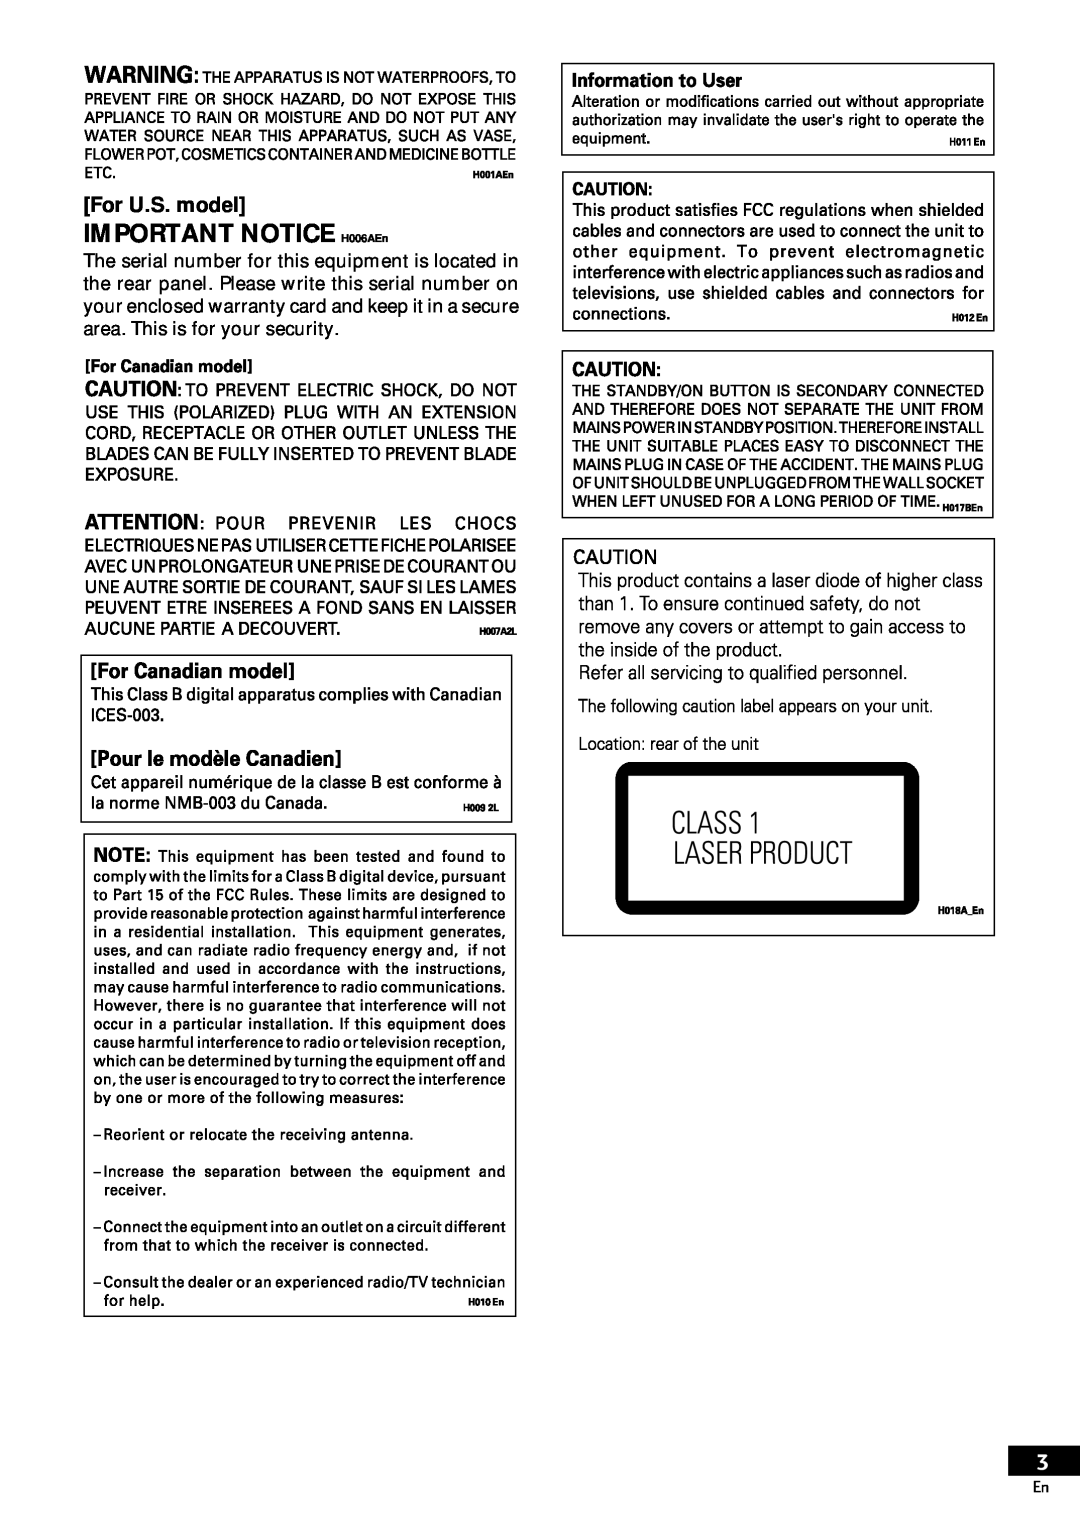 Pioneer DV-S733A operating instructions IMPORTANT NOTICE H006AEn, For U.S. model 